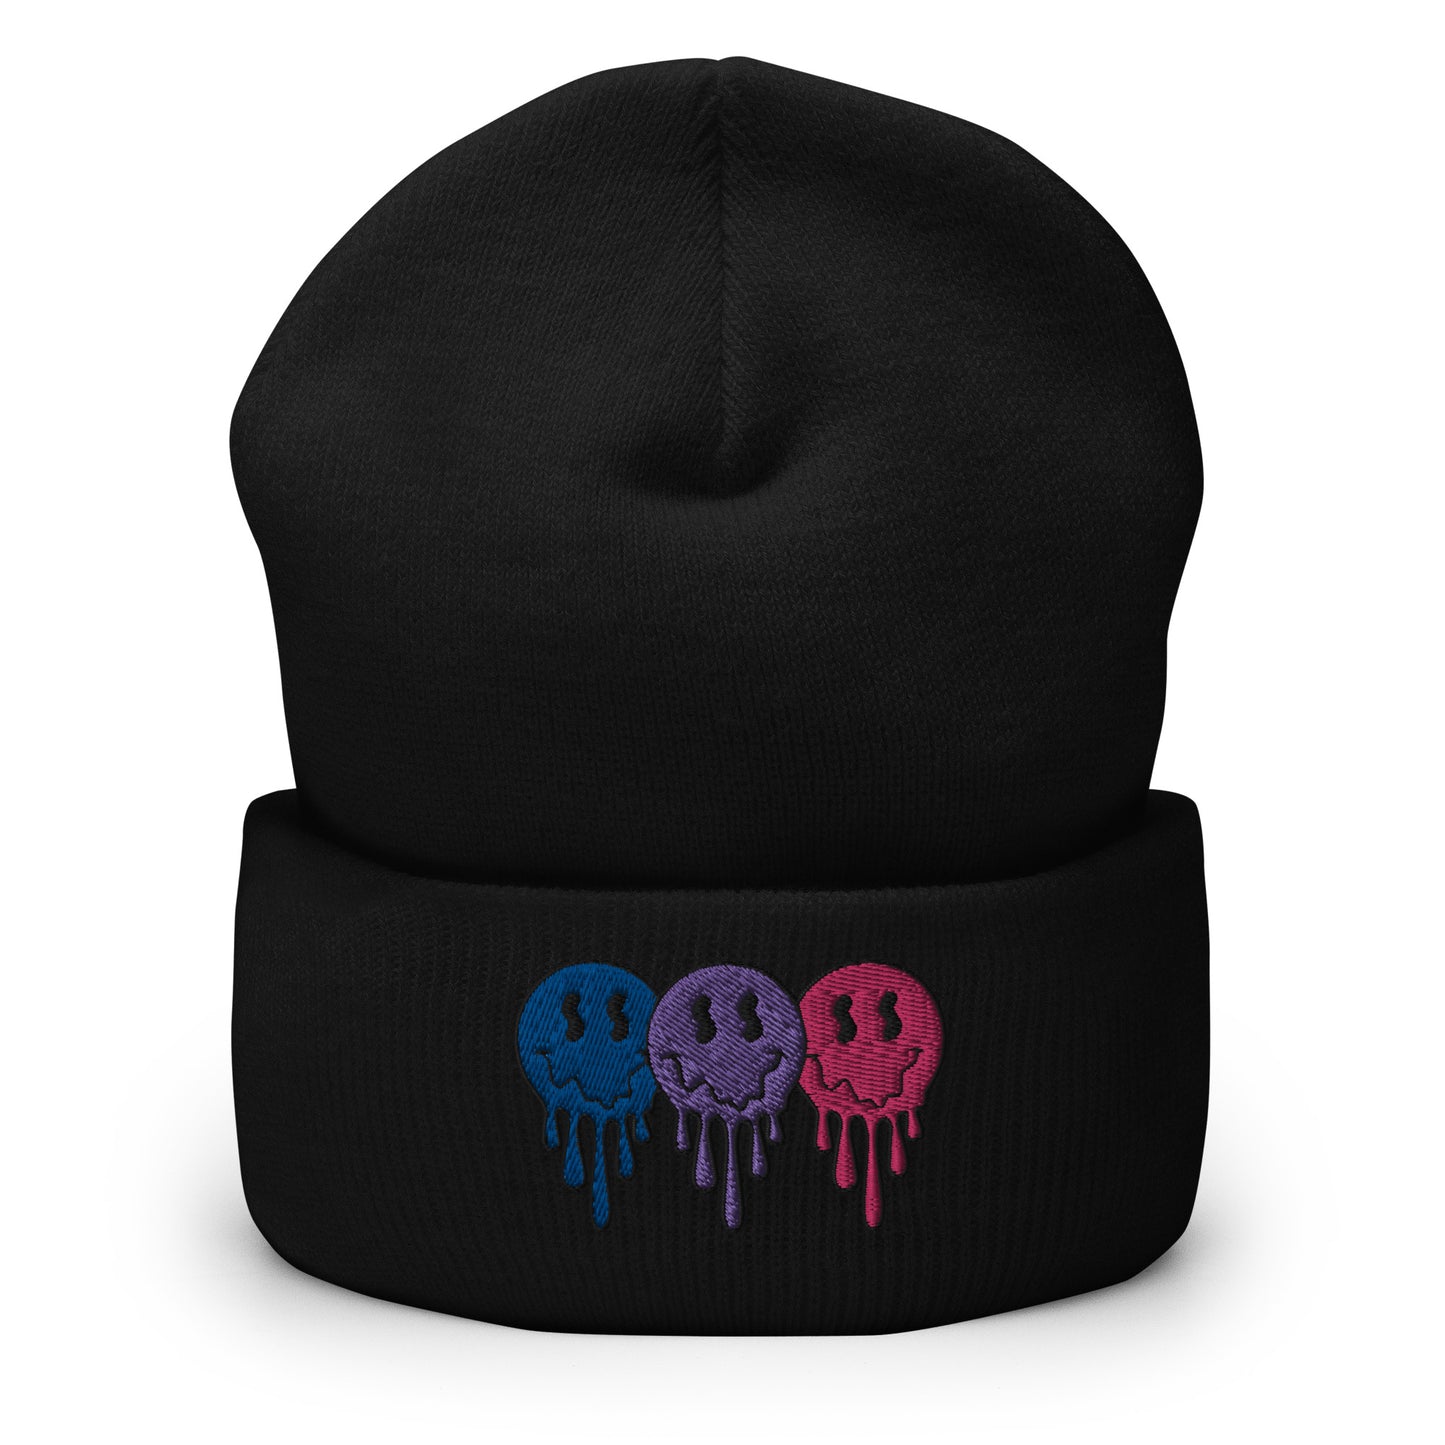 Bisexual Pride Smiley Face Beanie - Rose Gold Co. Shop